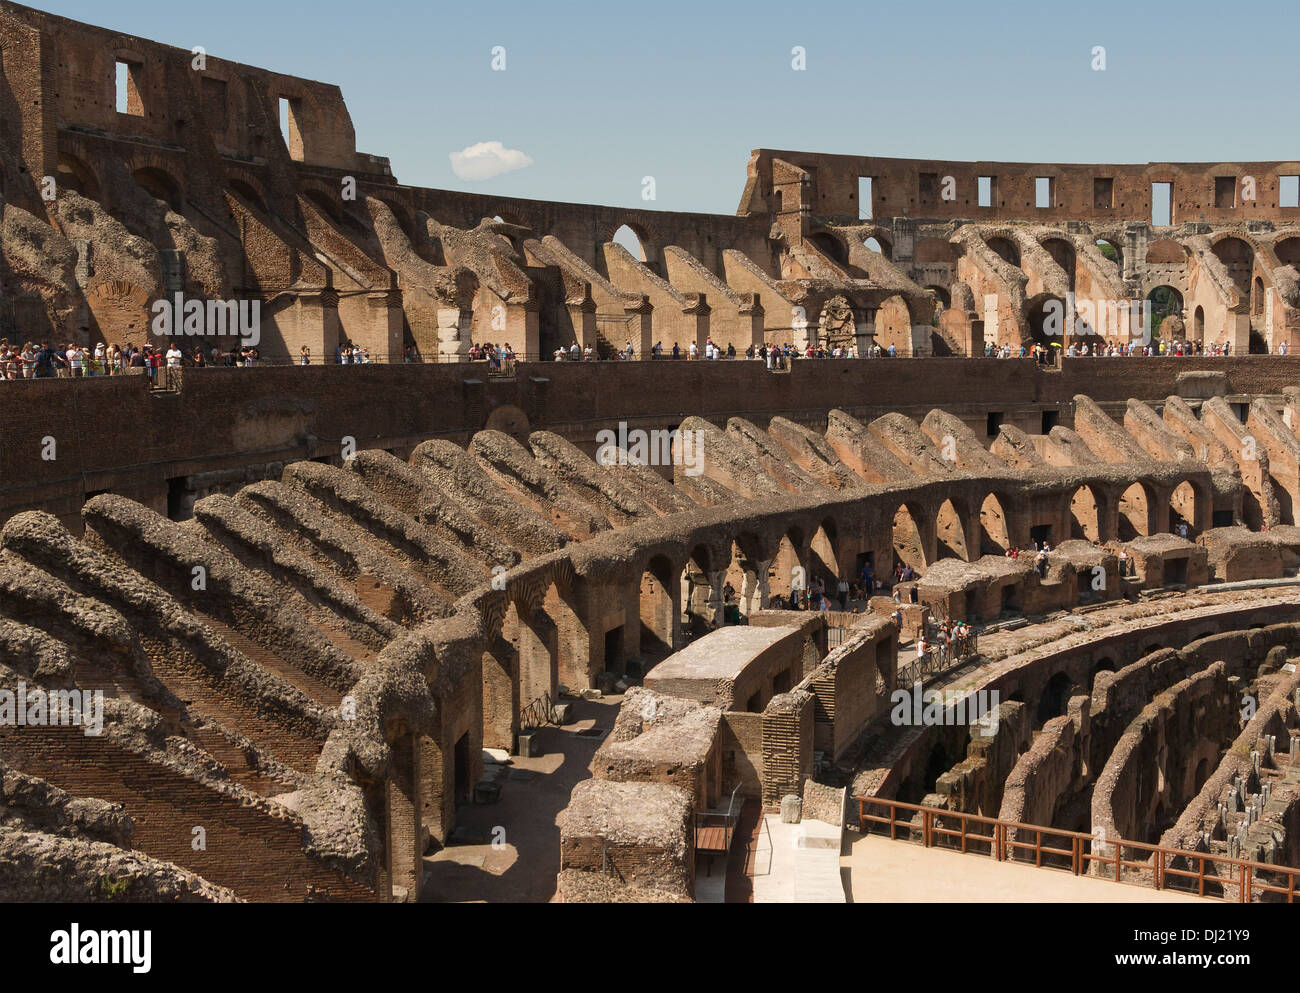 Le Colosseo, Rome, Italie. Banque D'Images